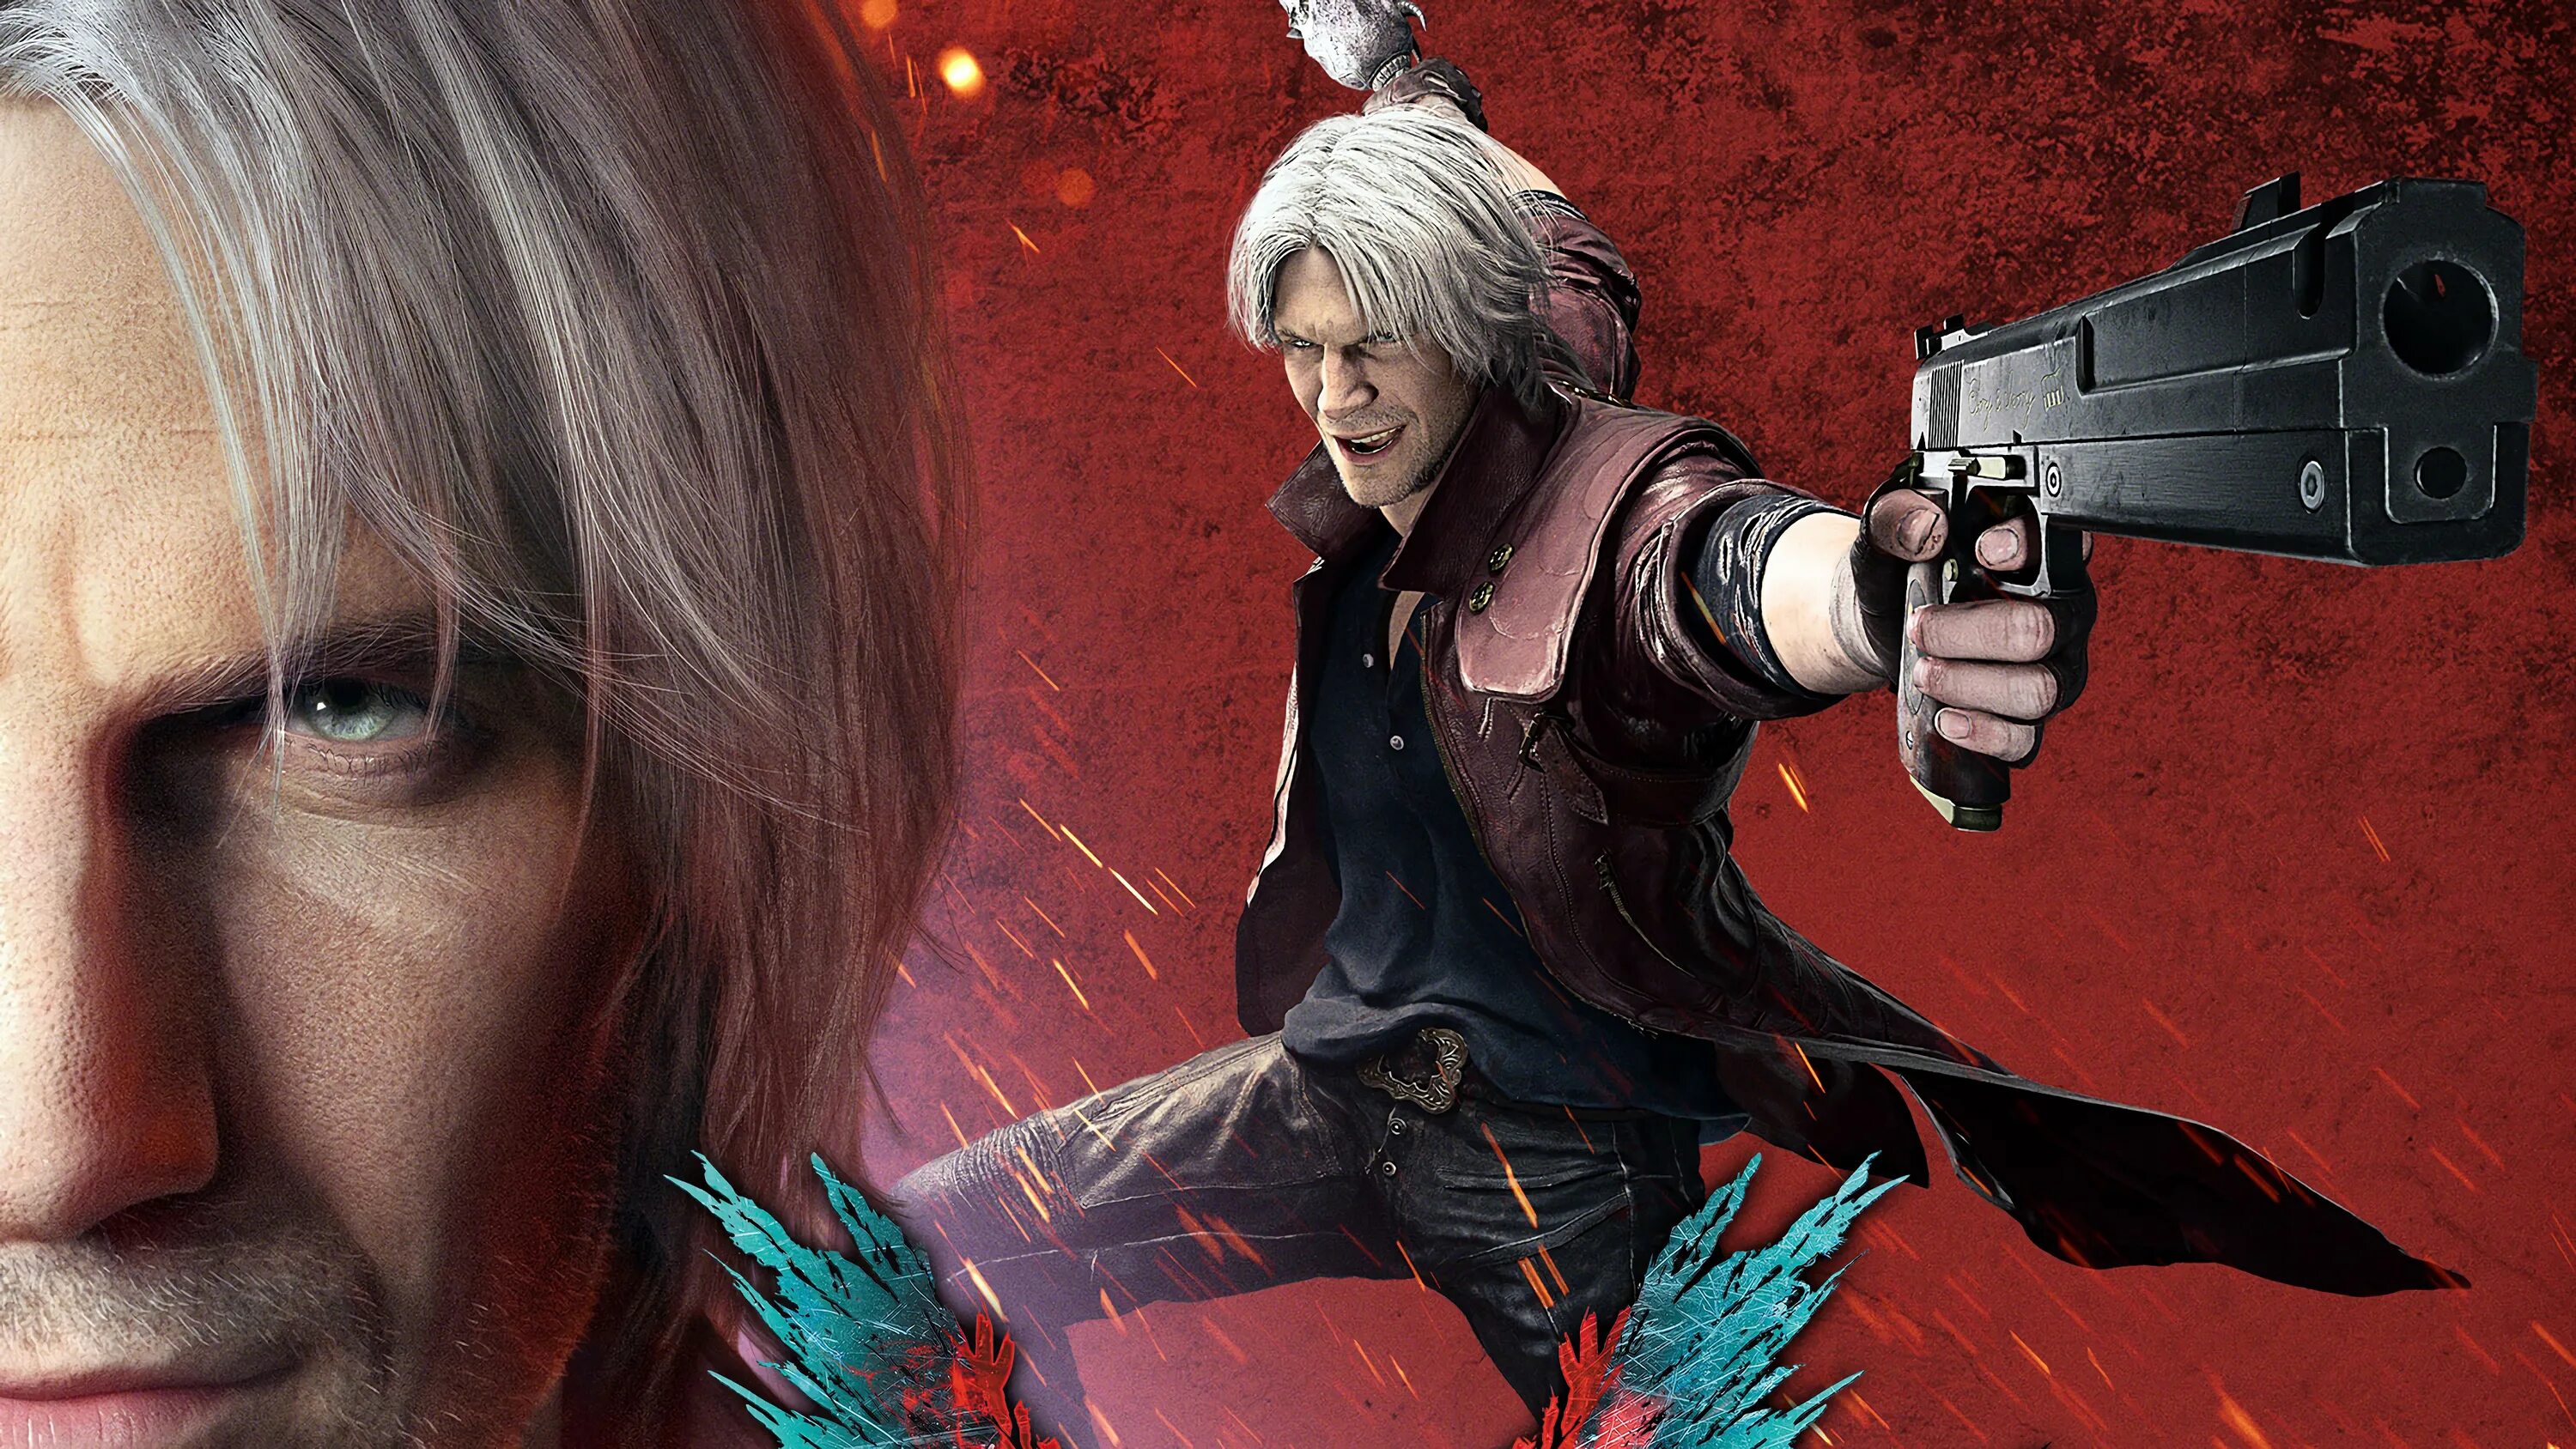 Данте Devil May Cry 5. Данте Devil May Cry. Devil May Cry 4 Данте. Данте Devil May Cry 3.